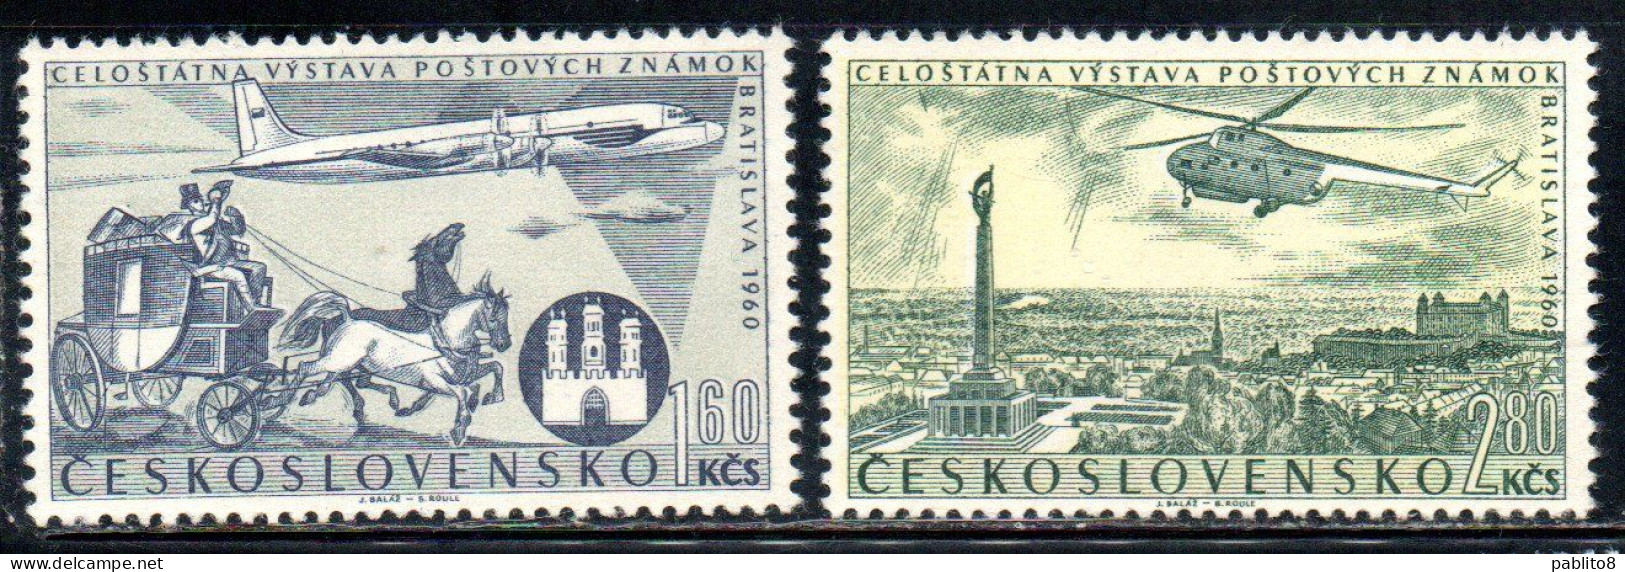 CZECHOSLOVAKIA CECOSLOVACCHIA 1960 AIR POST MAIL AIRMAIL NATIONAL STAMP EXHIBITION COMPLETE SET SERIE COMPLETA MNH - Luchtpost